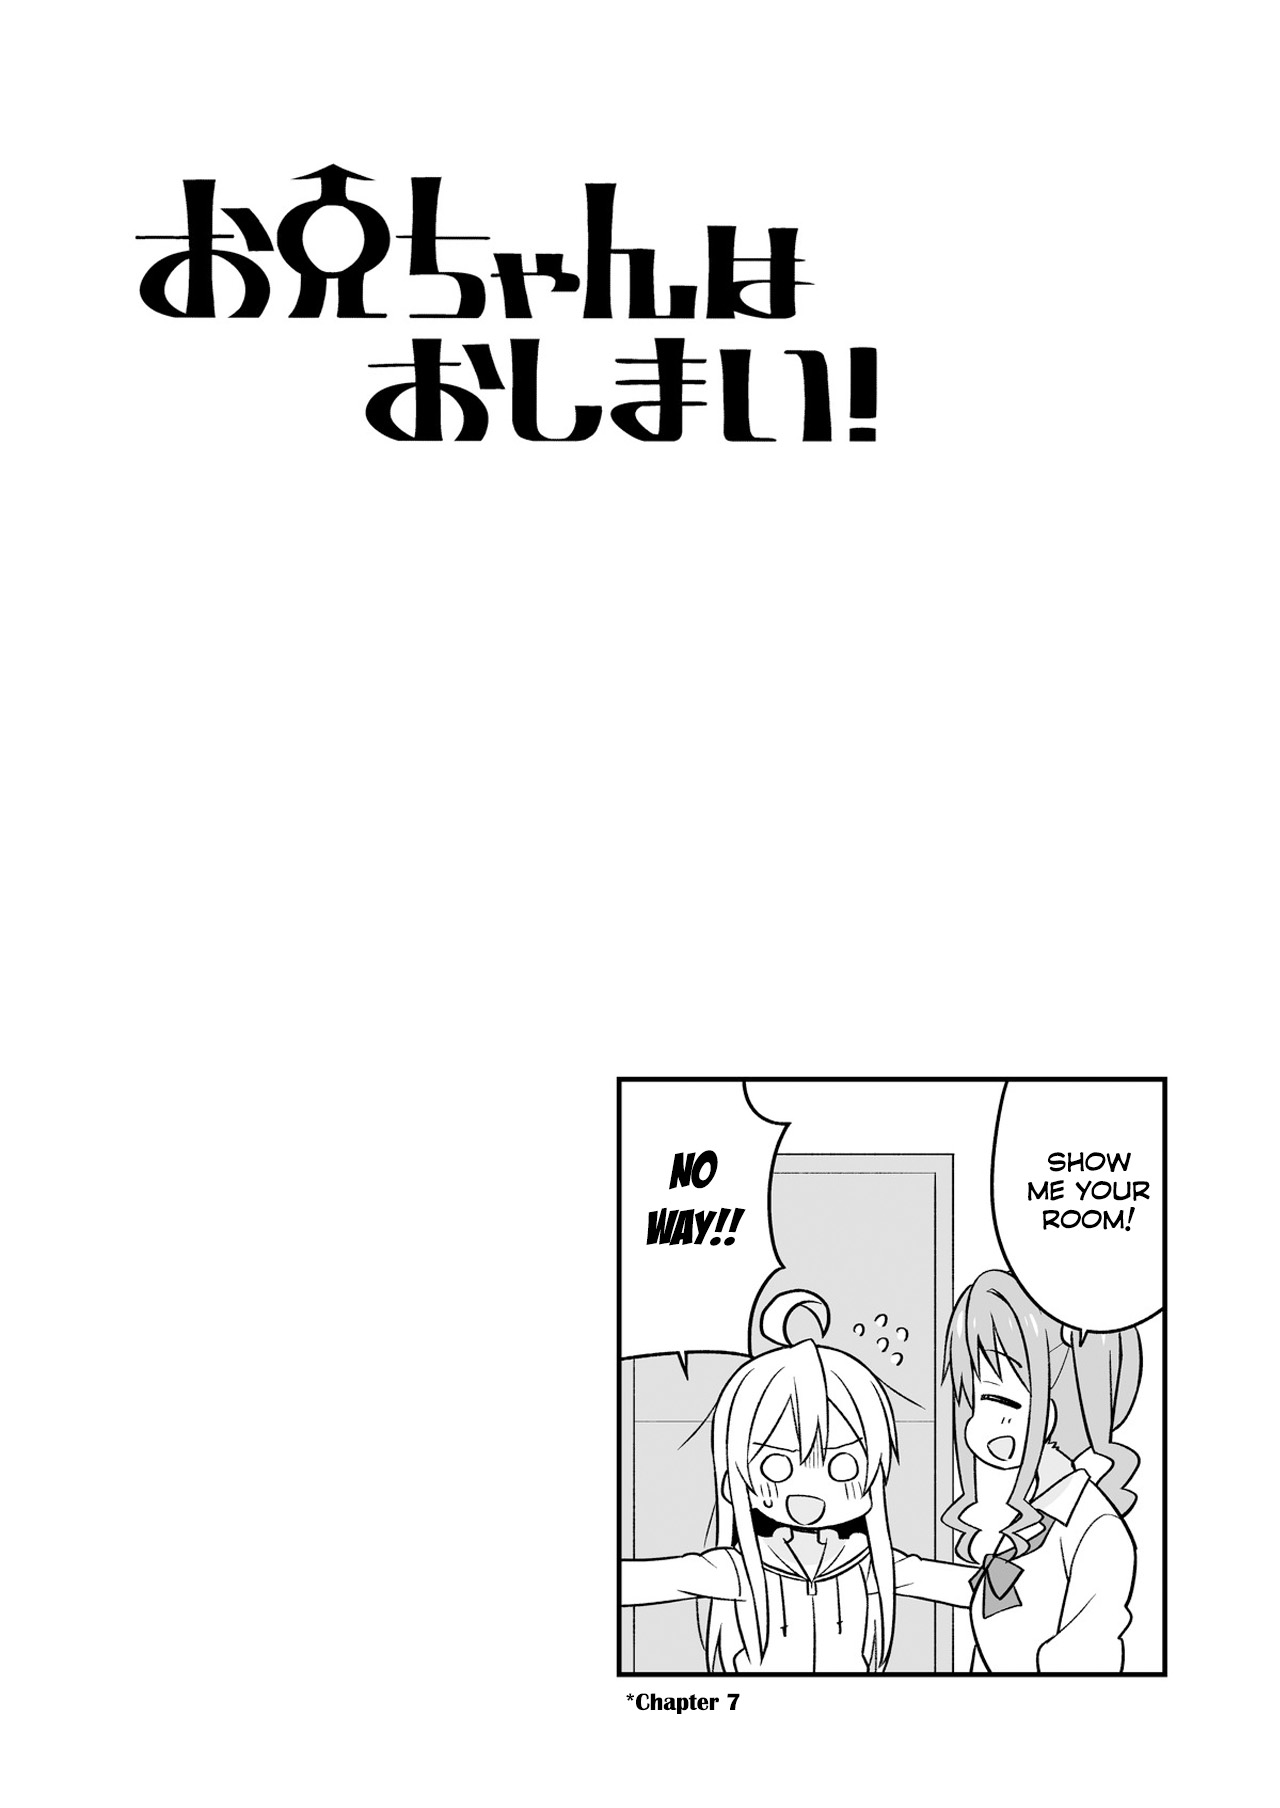 Onii chan is Done For! Vol. 1 Ch. 10.9 Chapter 1 10 Mini Extras